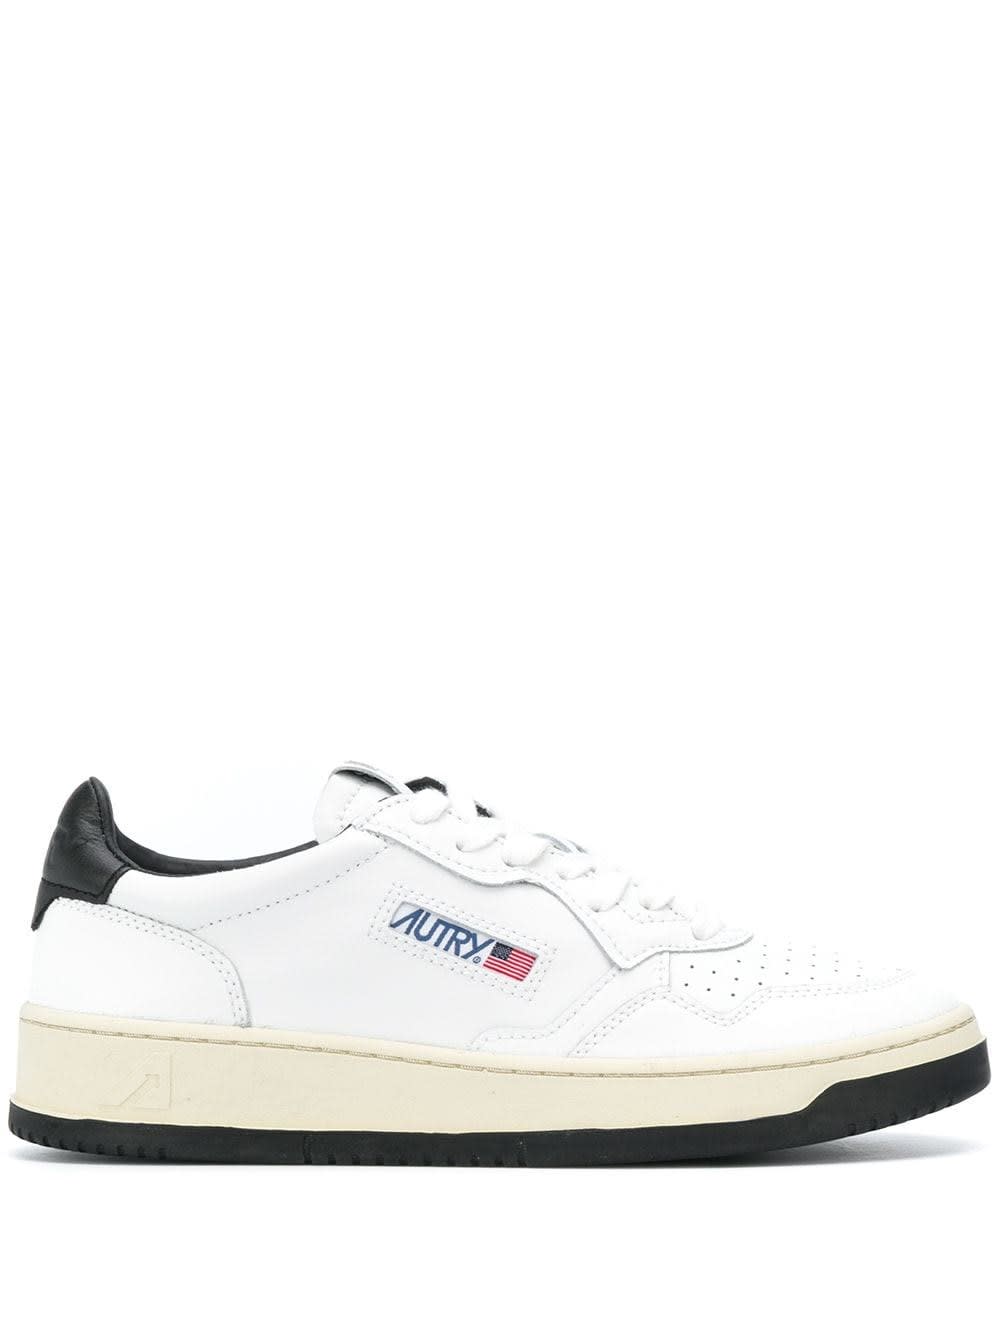 Autry 01 Low Sneakers In White And Black Leather